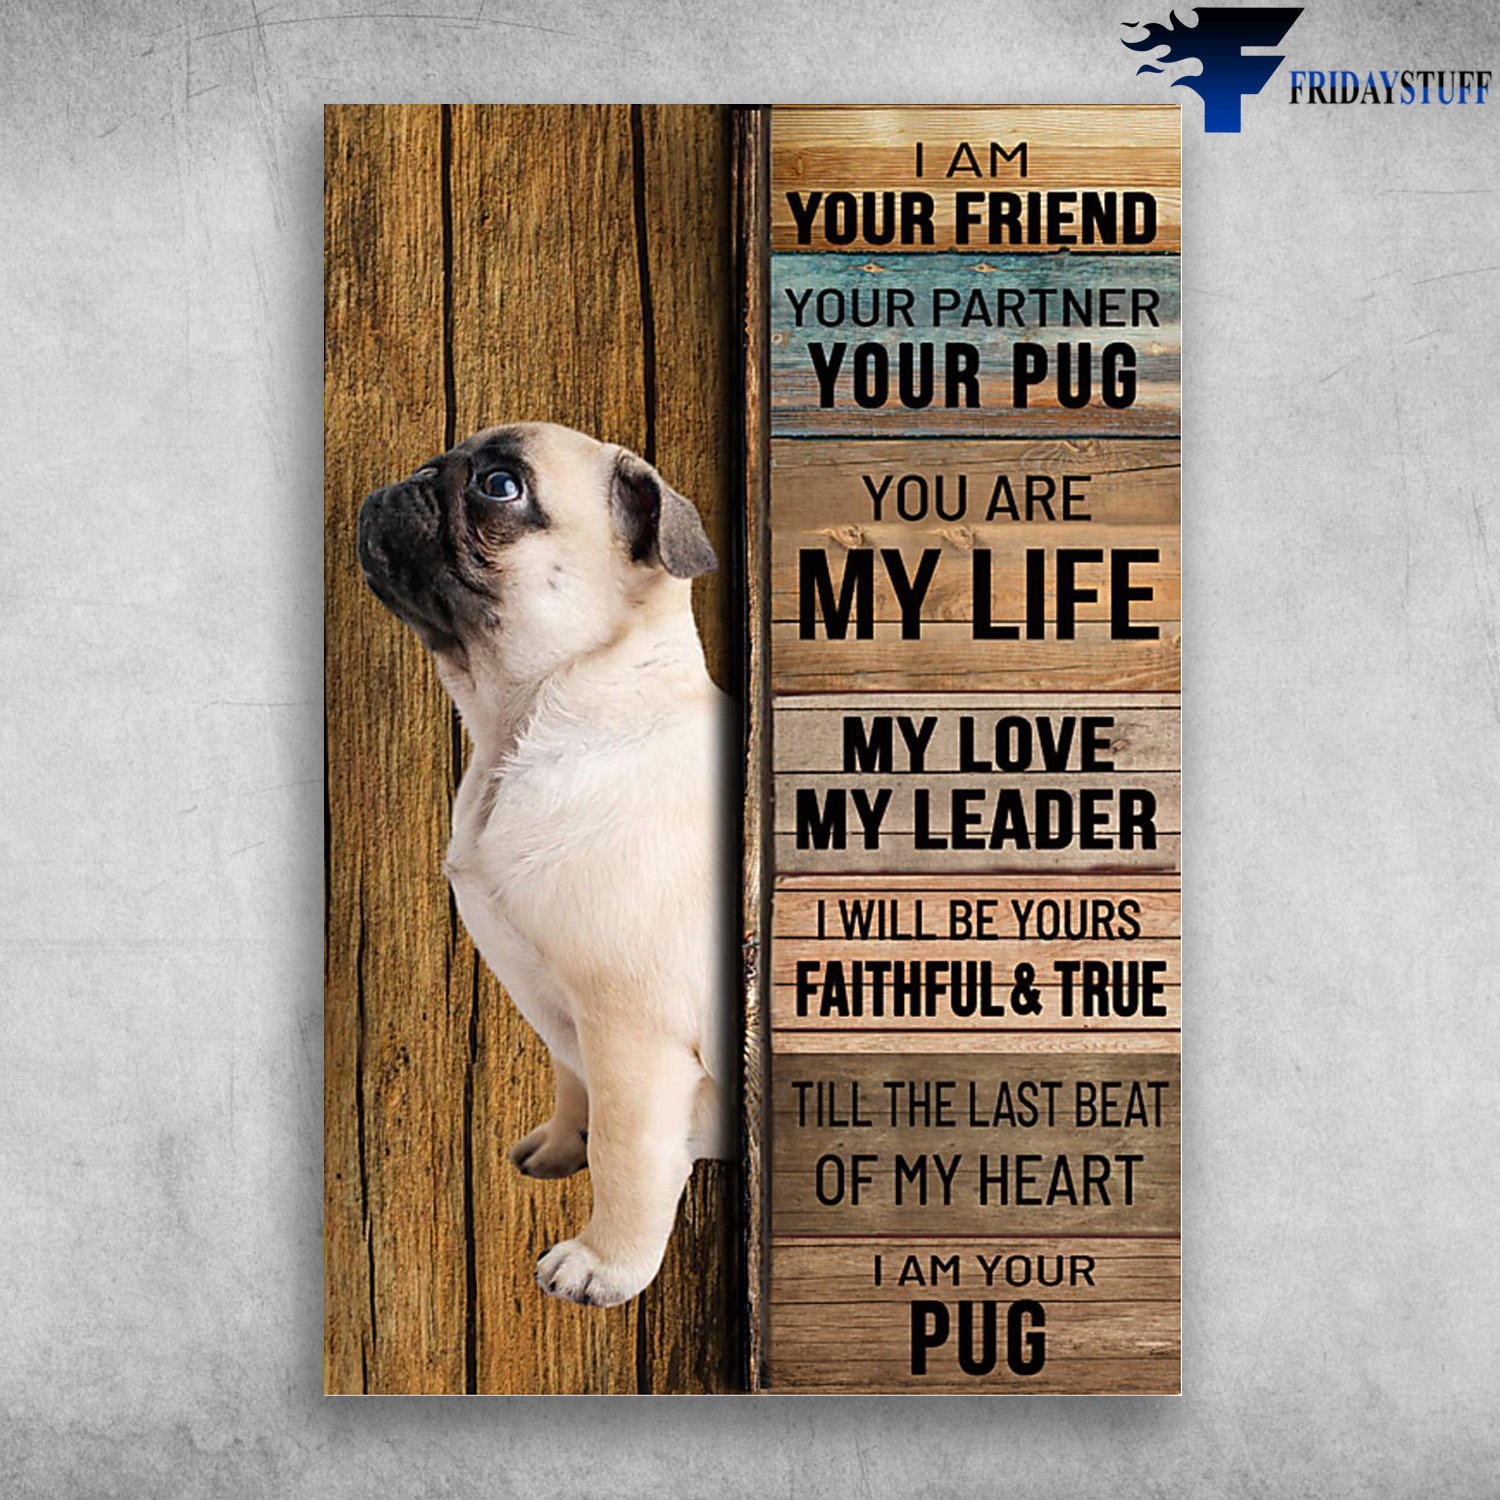 Bug Dog - I Am Your Friend, Your Partner, Your Pug, You Are My Life, My Love, My Leader, I Will Be Yours Faithful And True, Till The Last Beat Of M Heart, I AM Your Pug